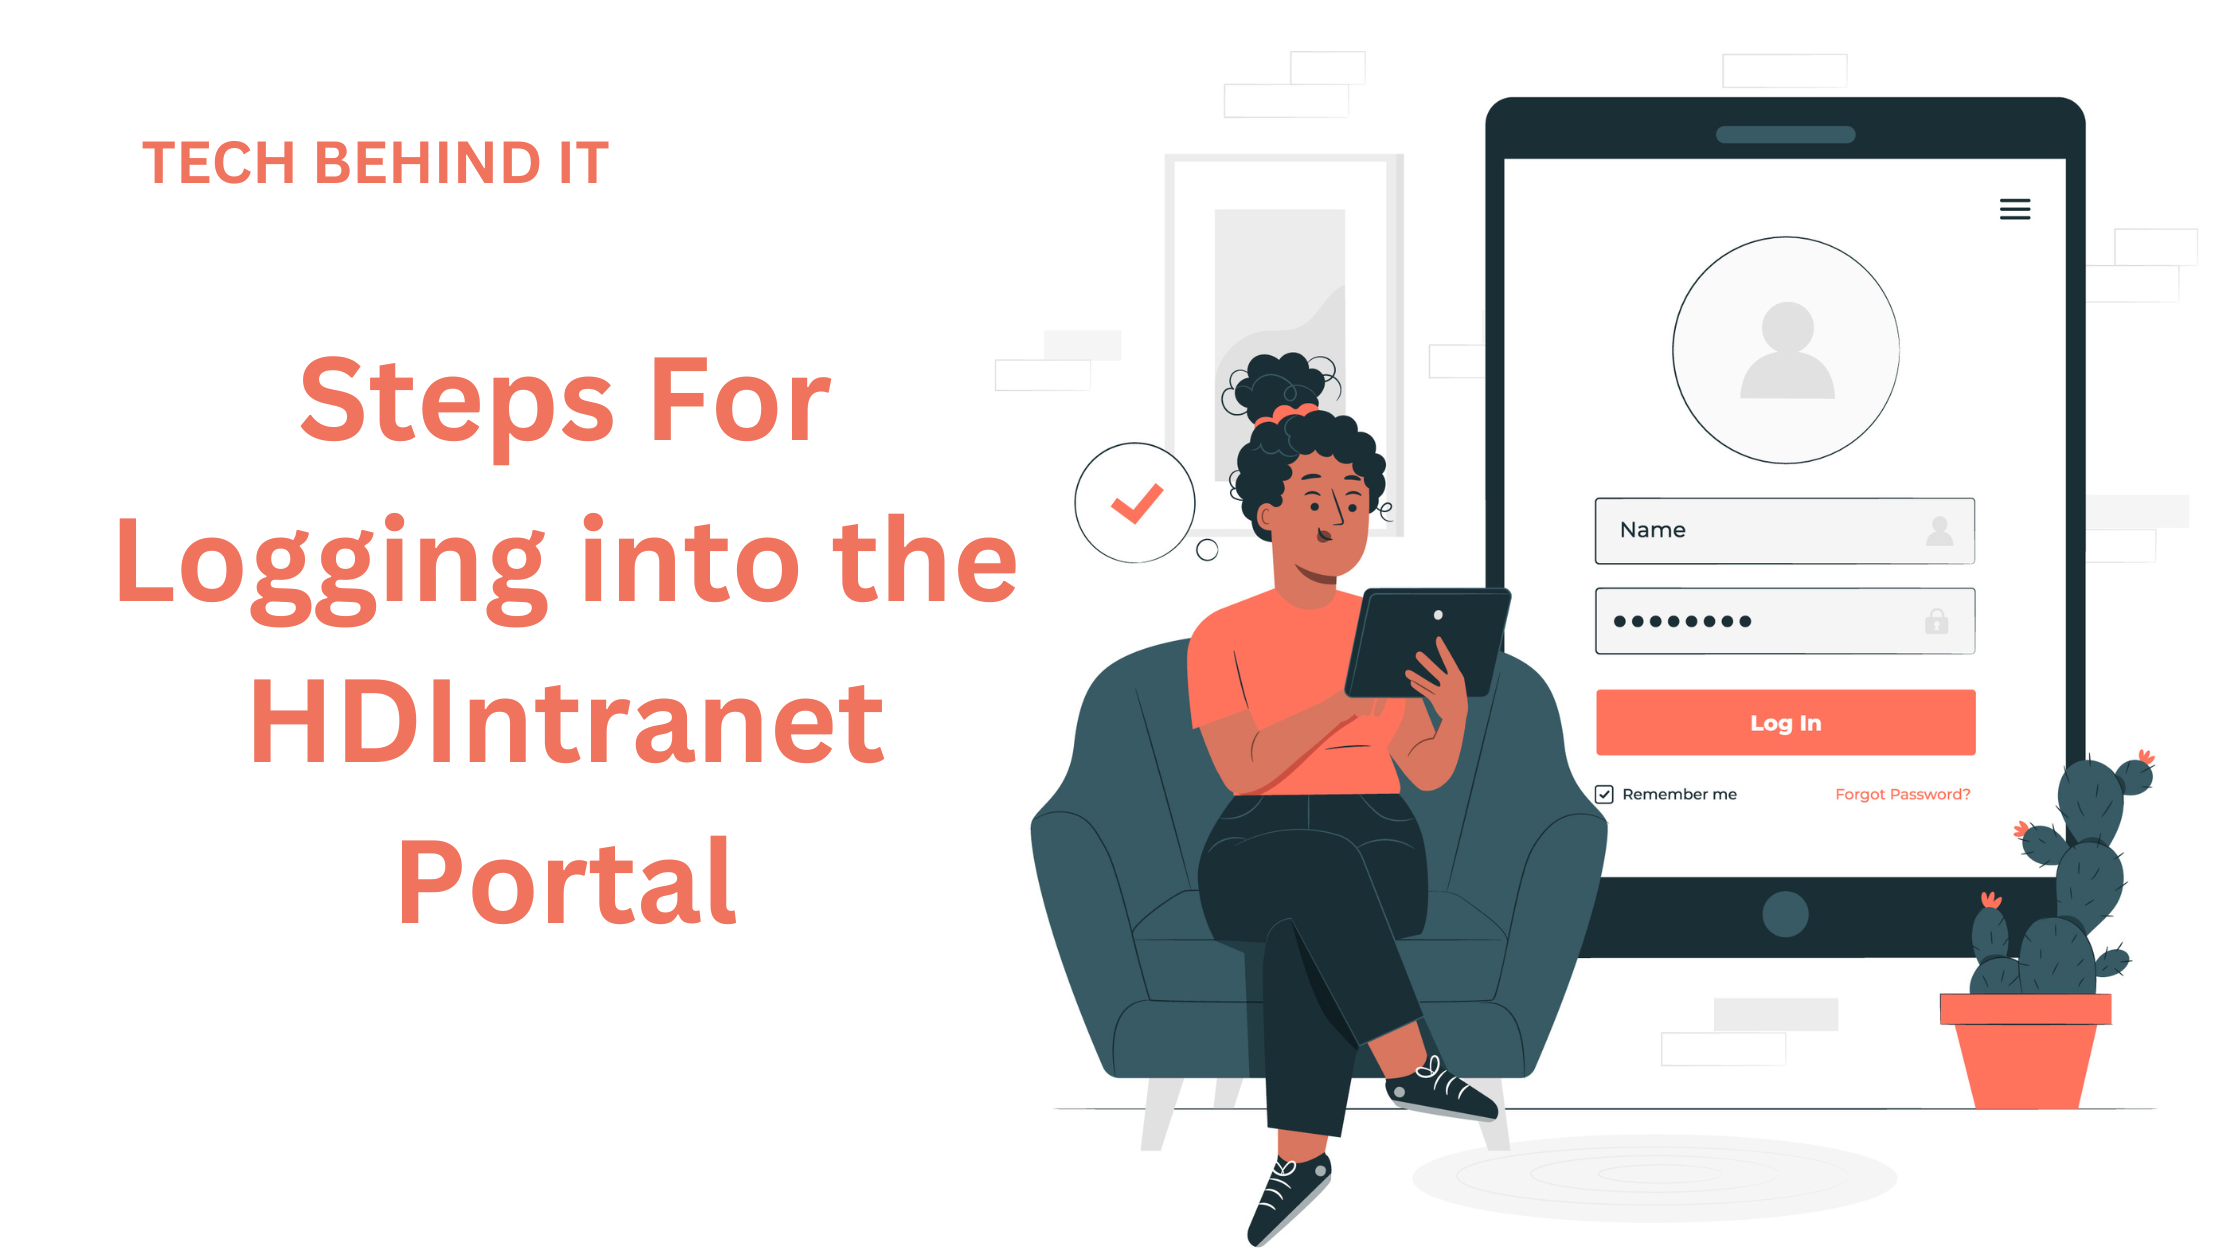 Steps For Logging into the HDIntranet Portal